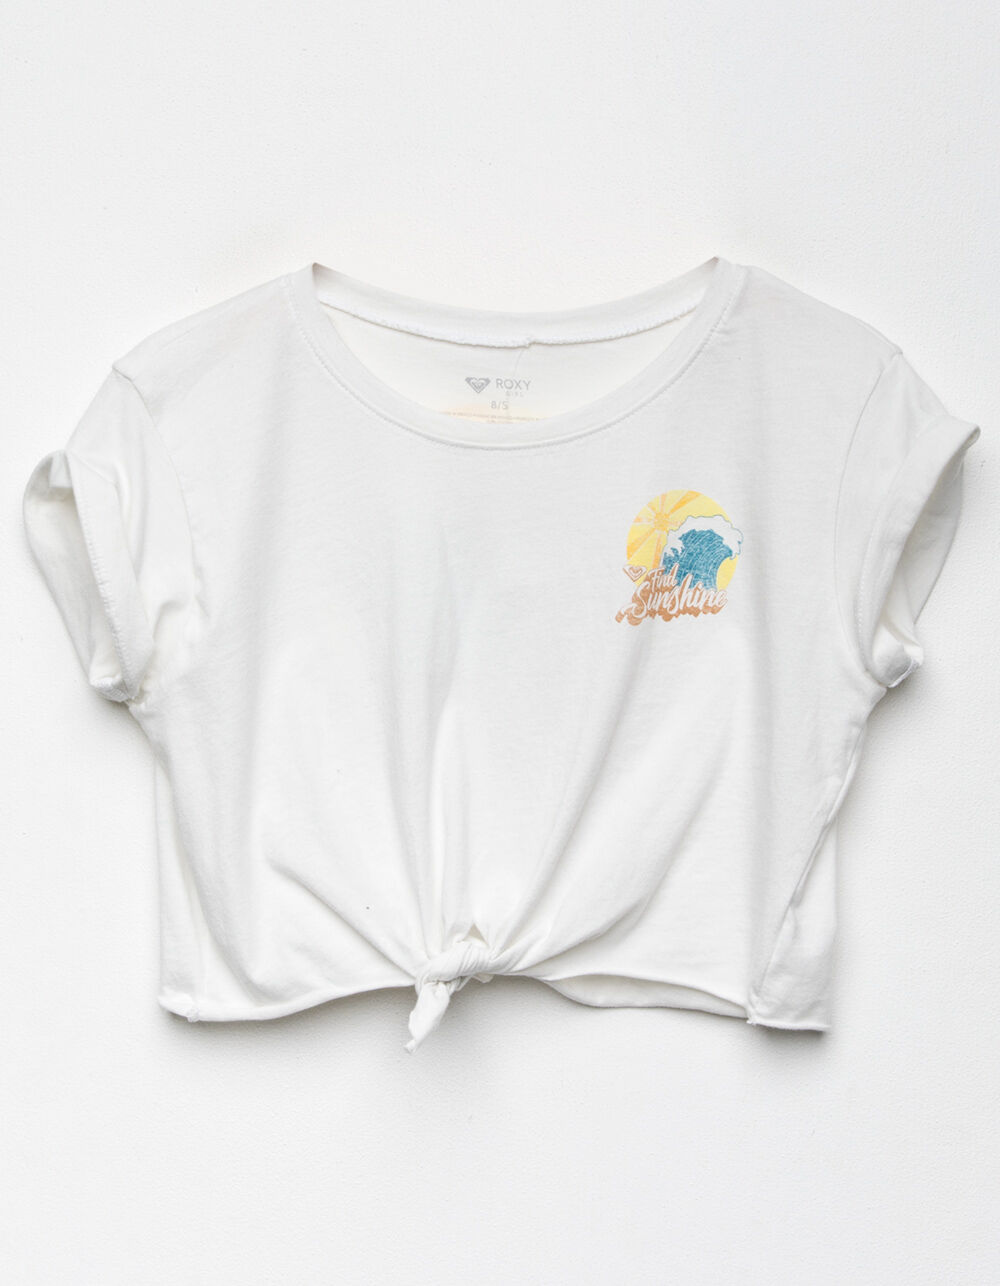 ROXY Catching Waves Girls Tie Front Tee - WHITE | Tillys